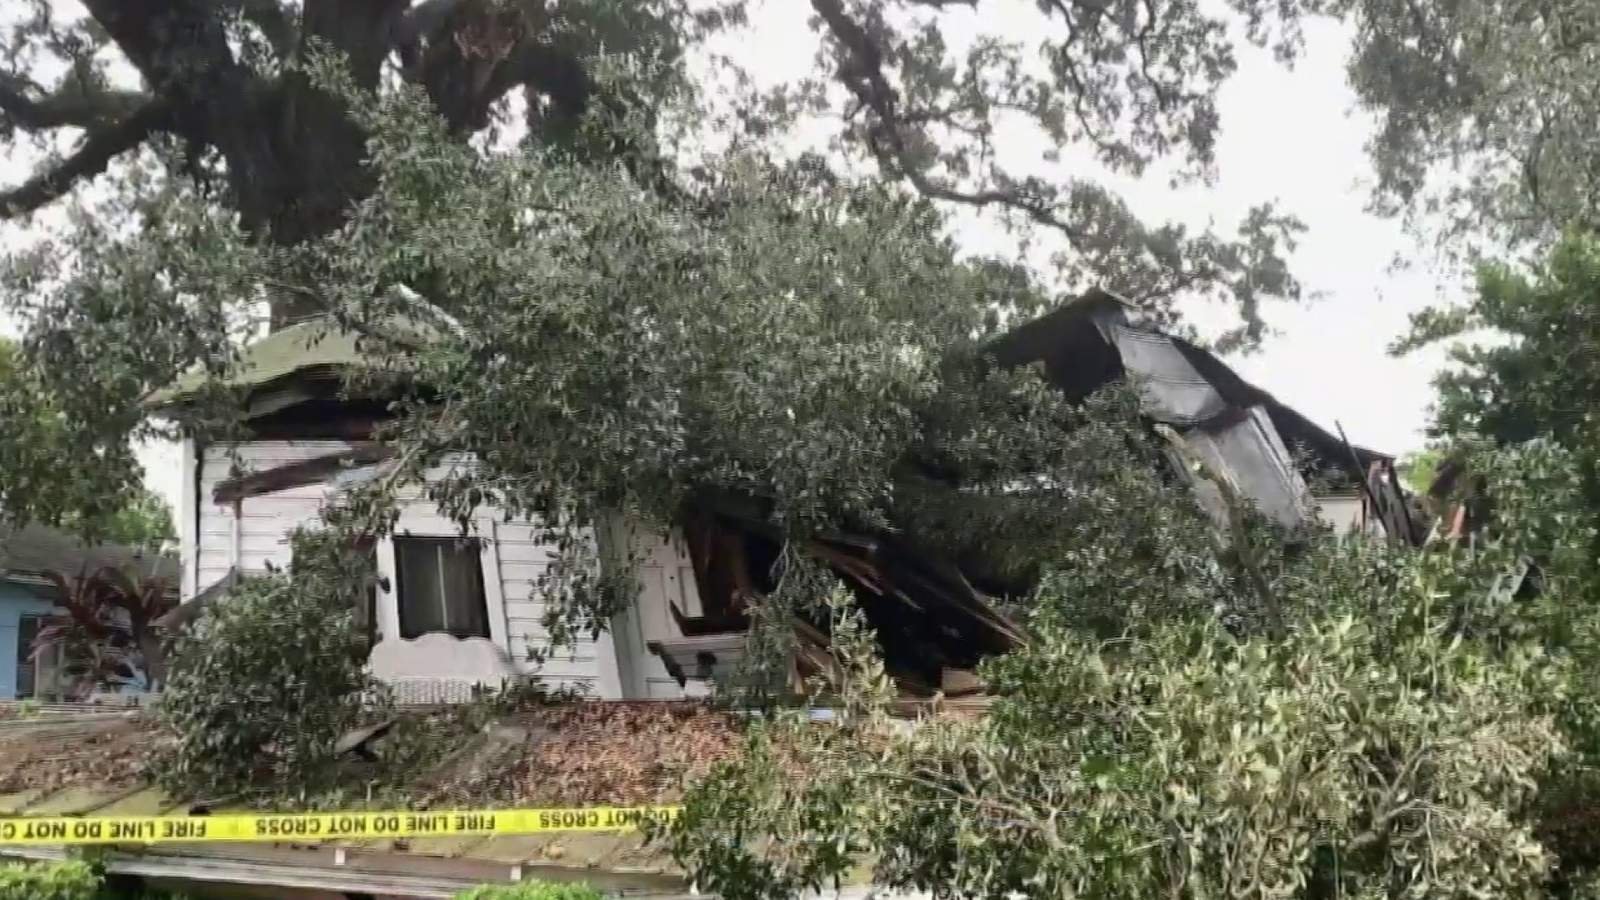 90-year-old woman escapes injury after massive tree falls on home